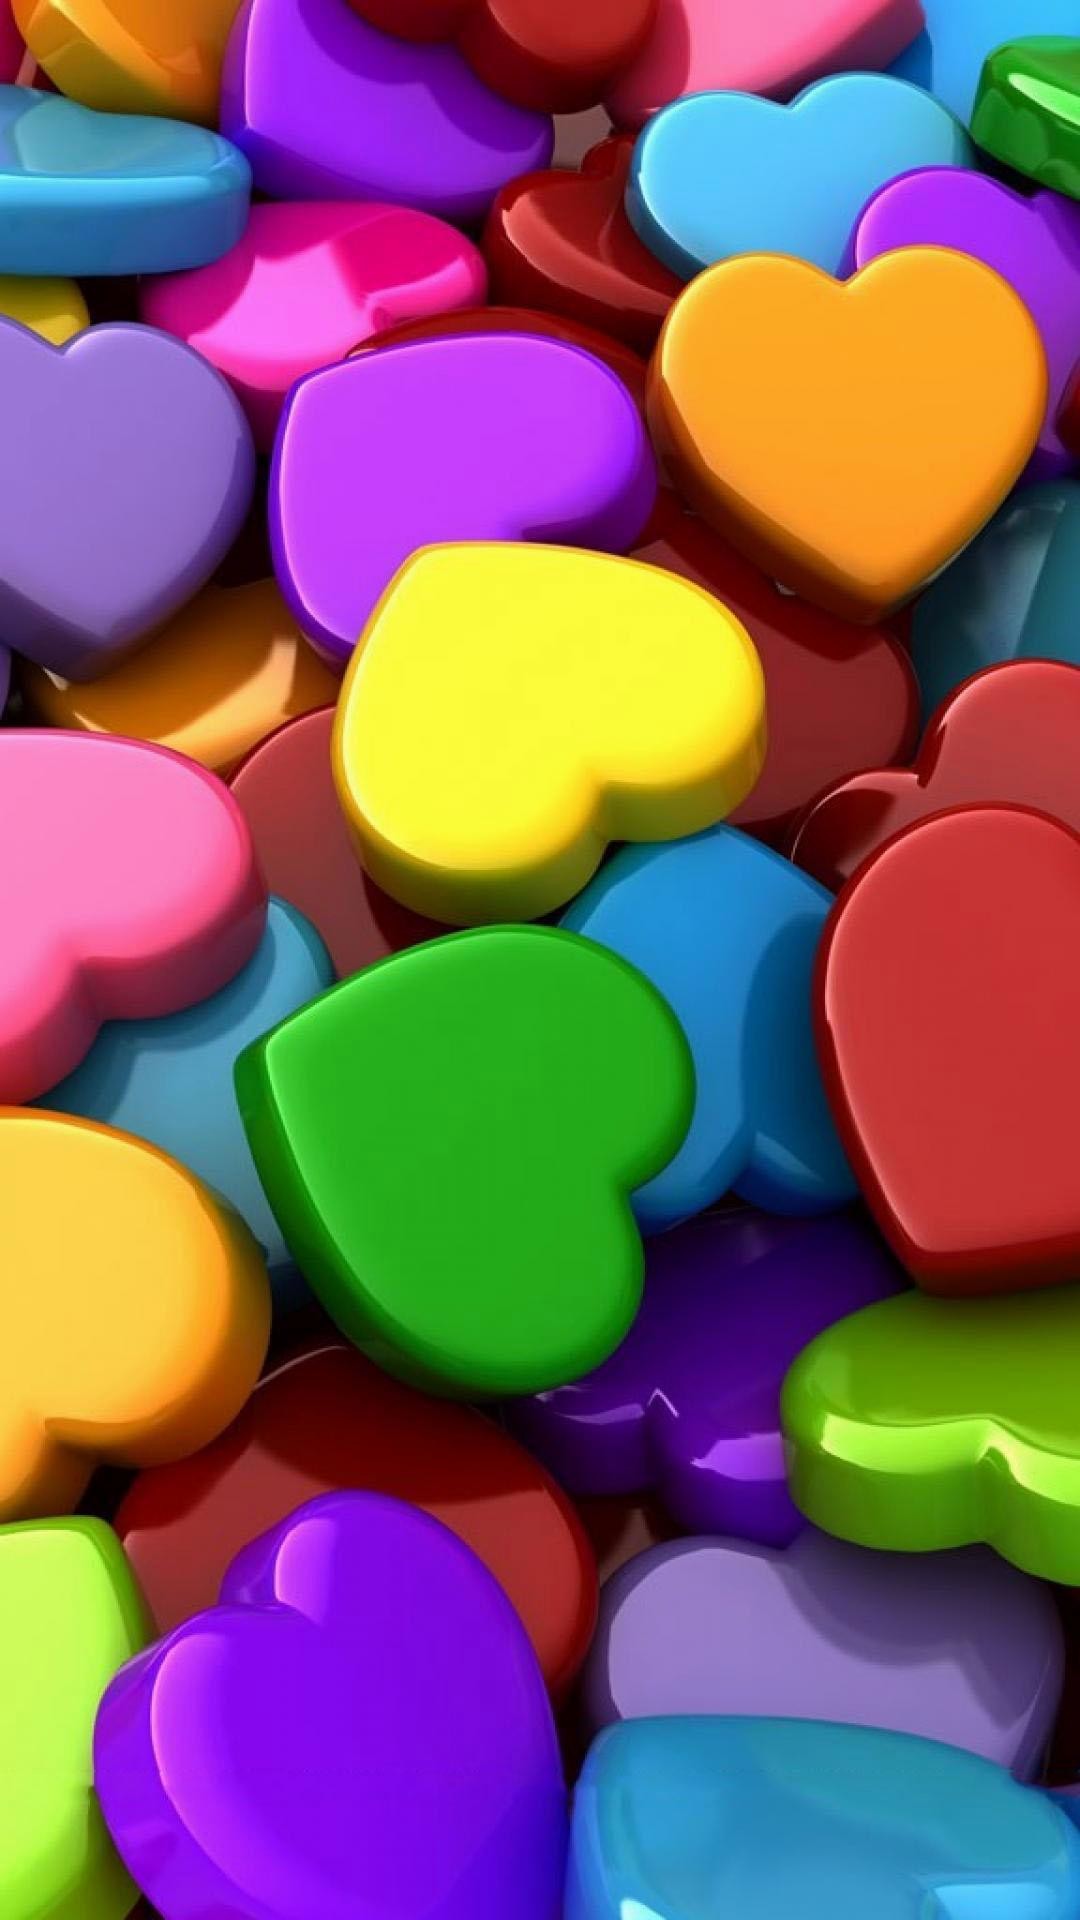 1080x1920 wallpapers for android phones 1080 x 1920 Love colourful hearts 3d